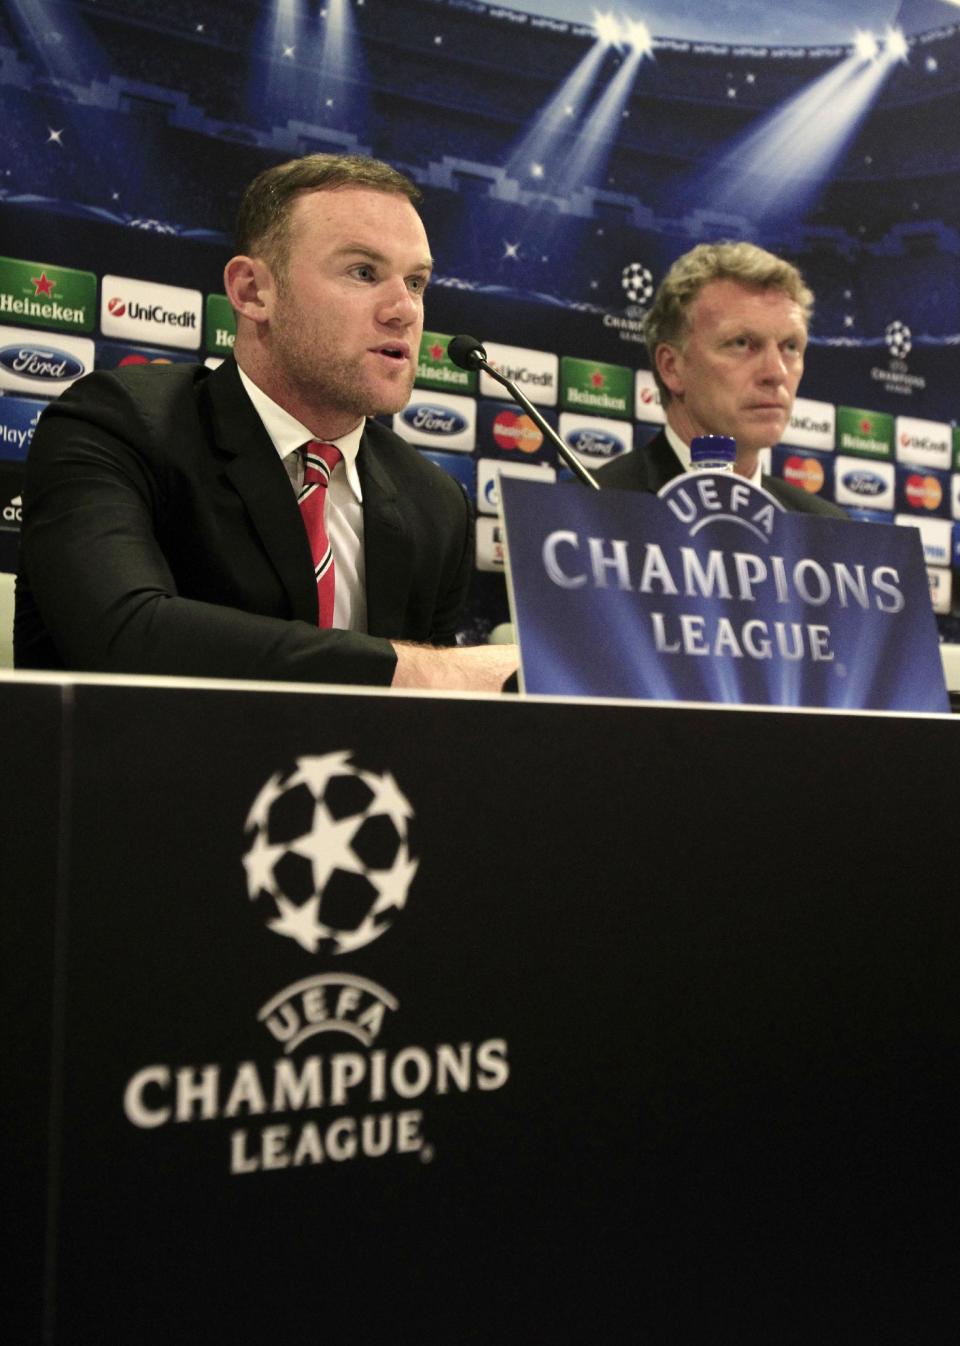 Manchester United's player Wayne Rooney, left, and coach David Moyes attend a news conference at Georgios Karaiskakis stadium, in Piraeus port, near Athens, on Monday, Feb. 24, 2014. Manchester United will play against Olympiakos in the Champions League's round of 16 on Tuesday. (AP Photo/Thanassis Stavrakis)